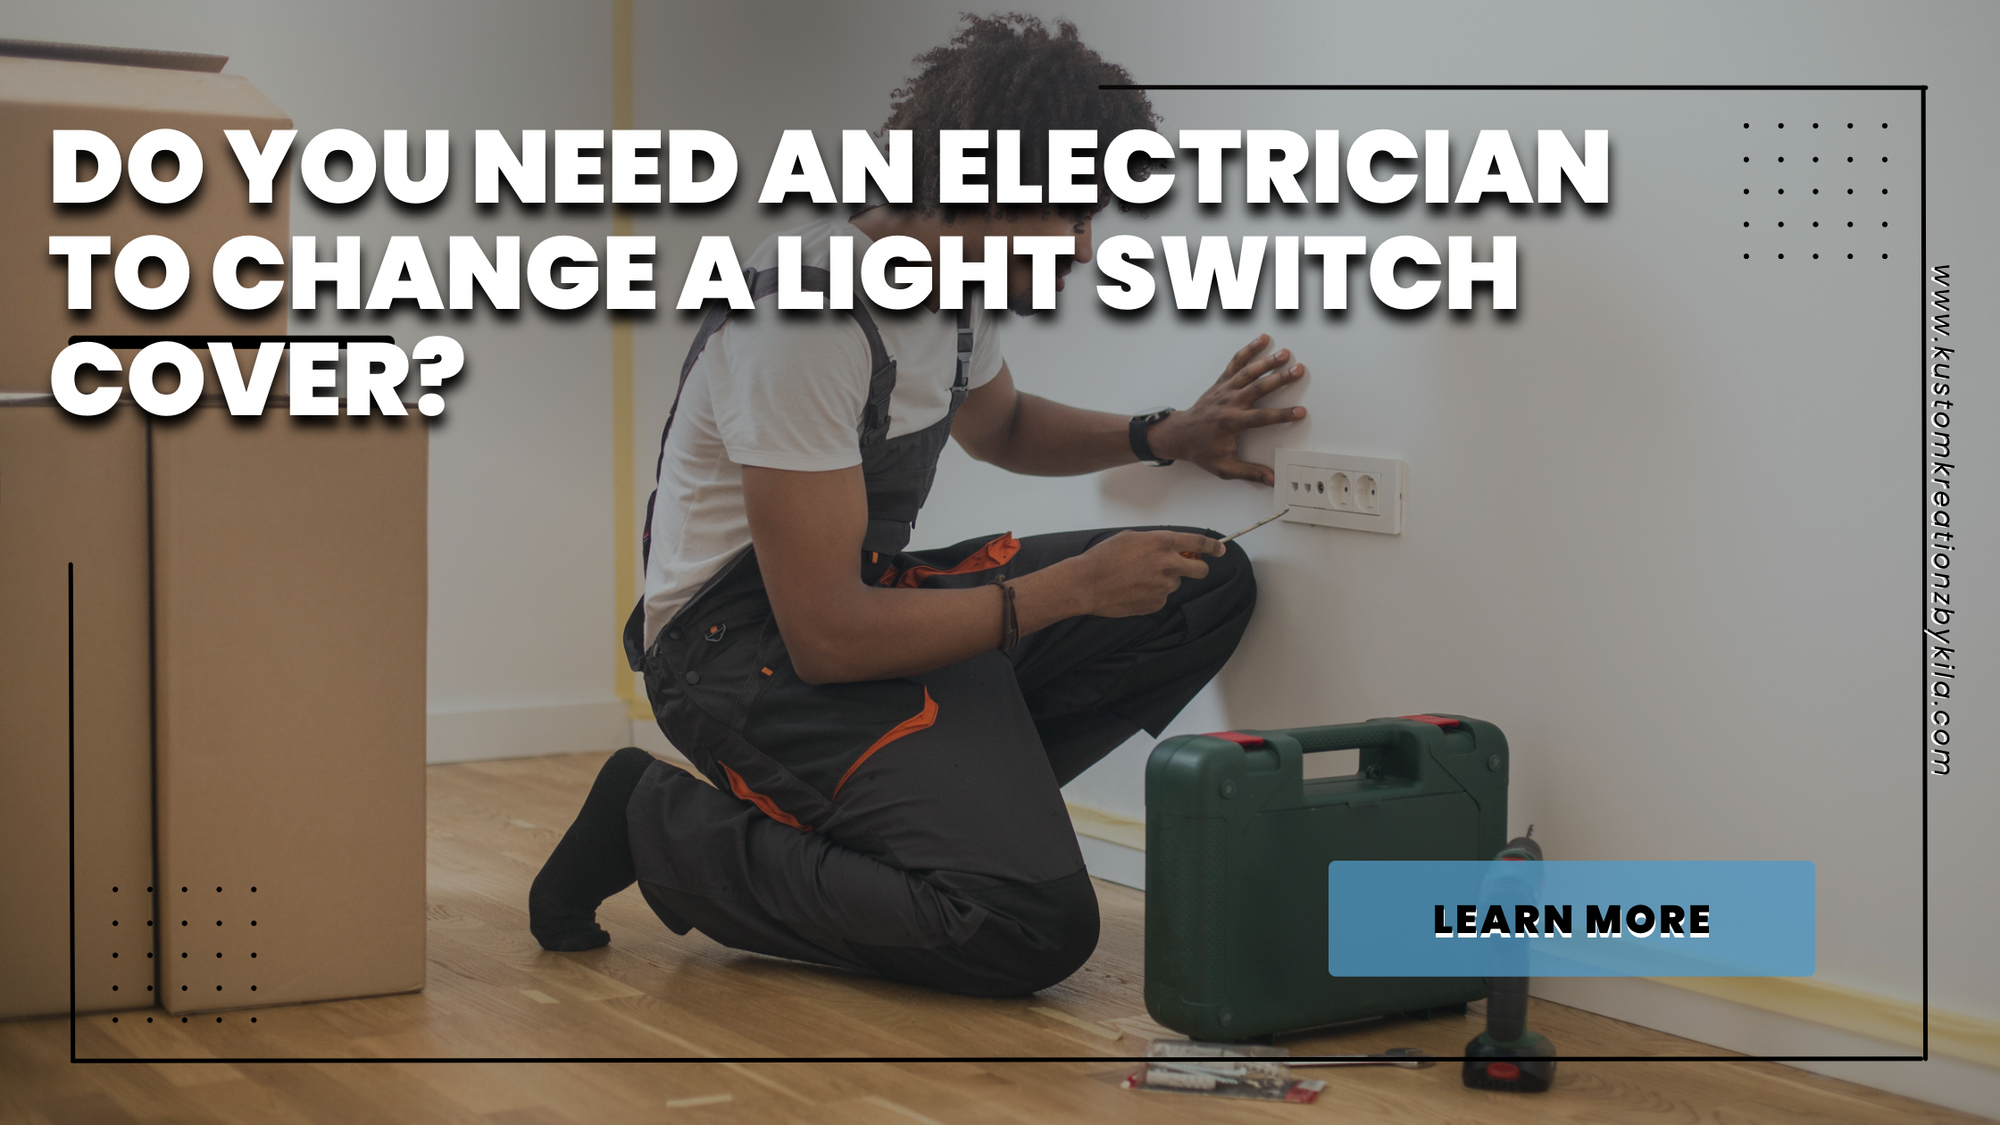 Do you need an electrician to change a light switch cover?